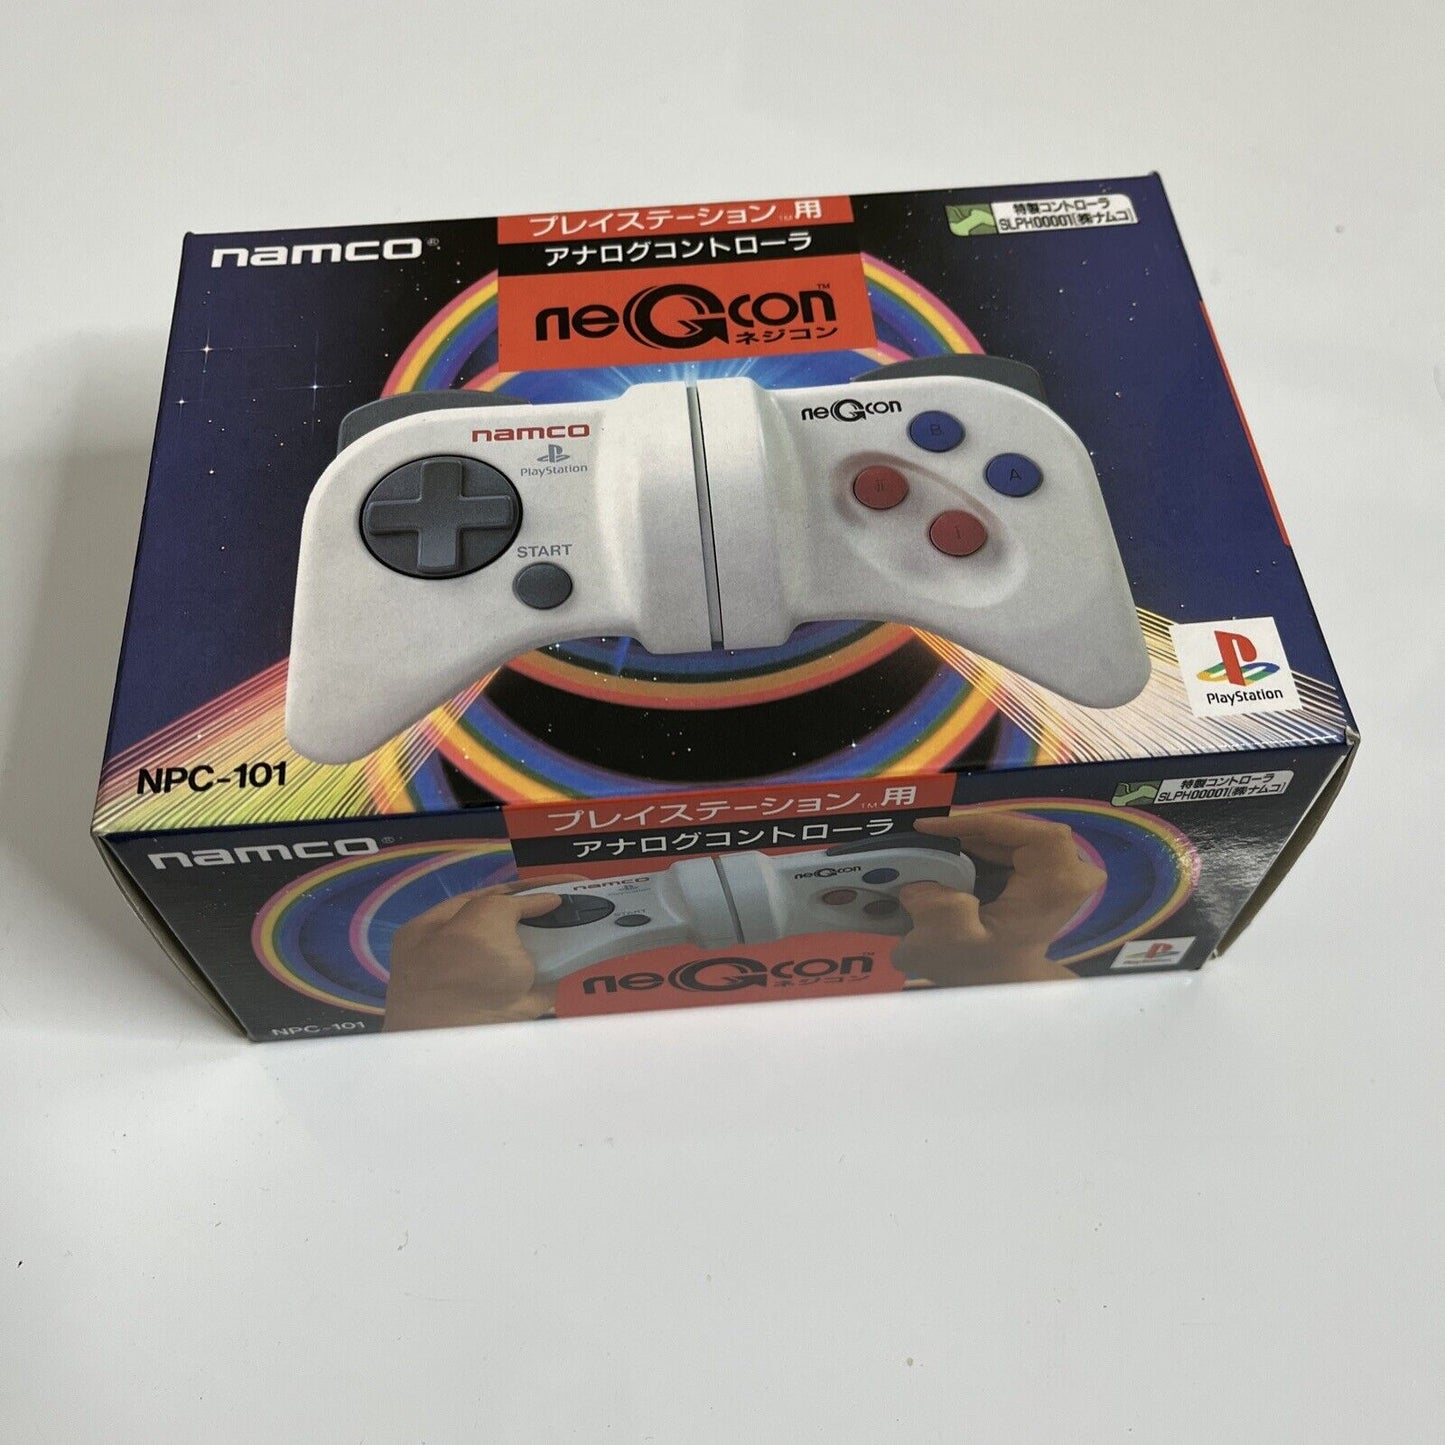 Sony PlayStation Namco Negcon Controller White for PS1 NPC-101 NEW